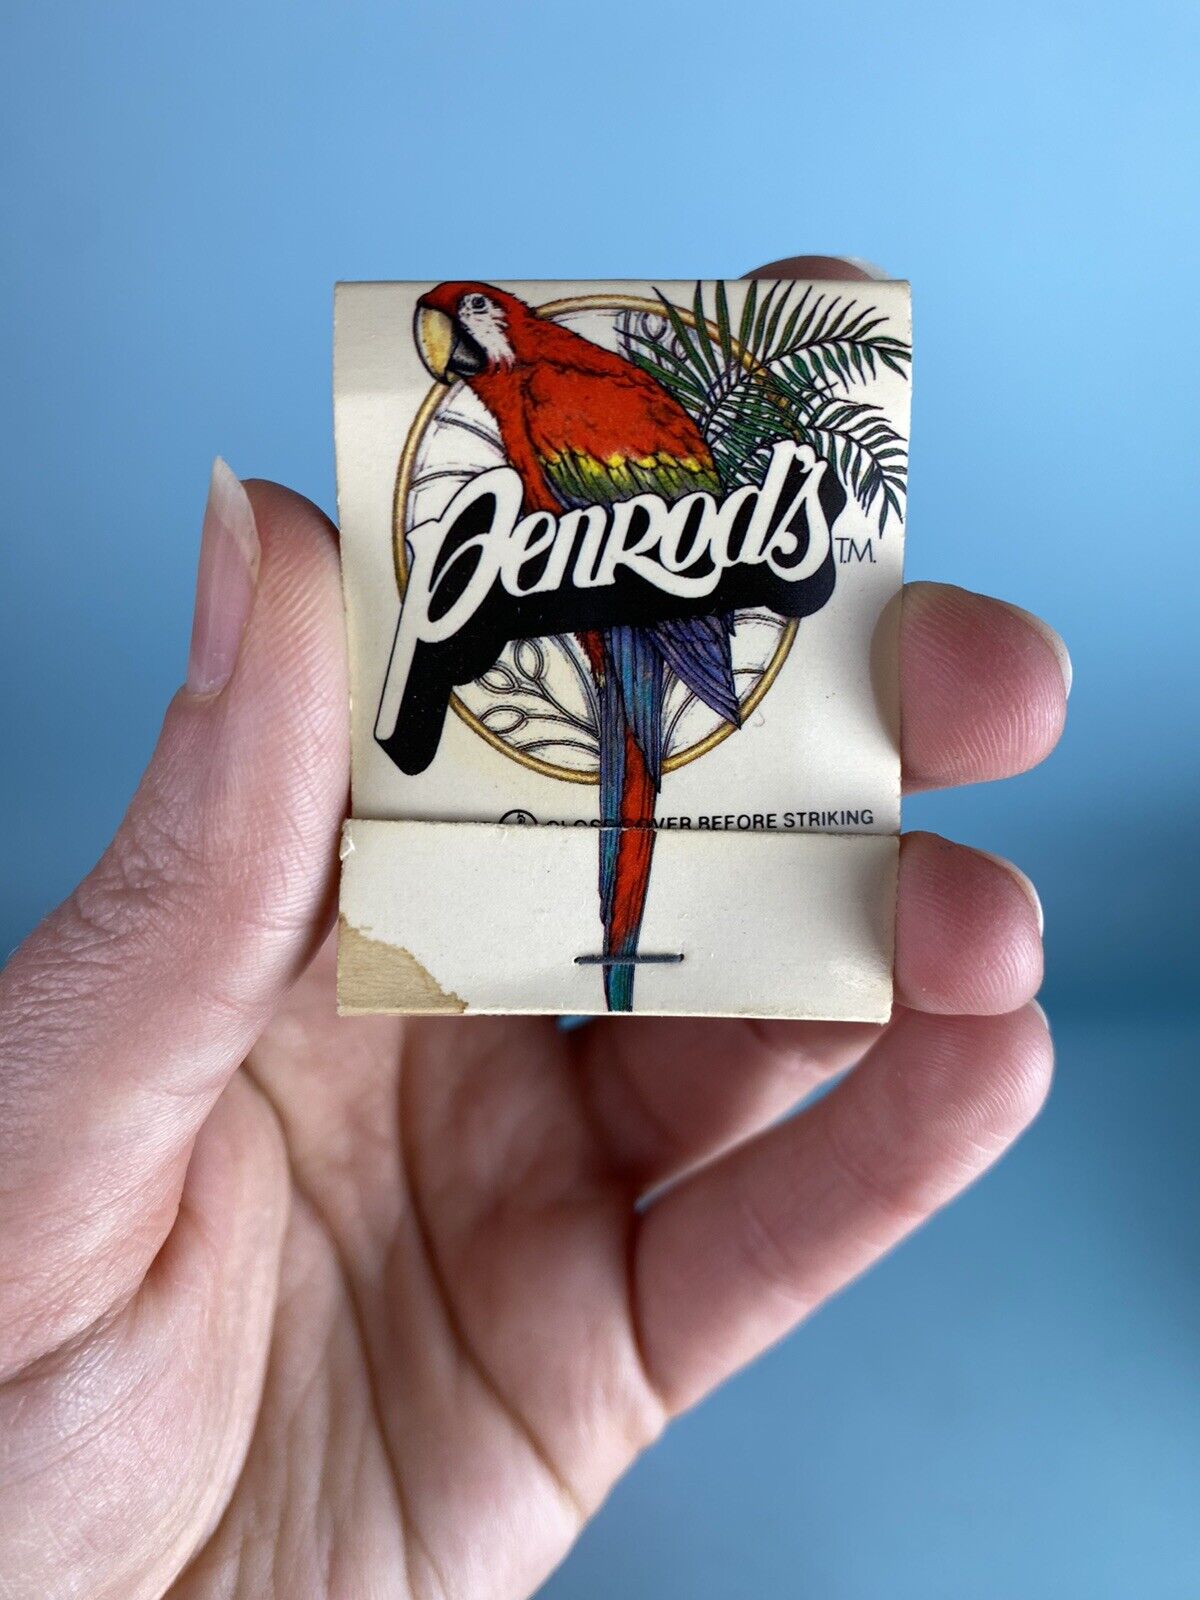 Vintage Matchbook Cover  Penrod’s  Tampa, Atlanta, Clearwater